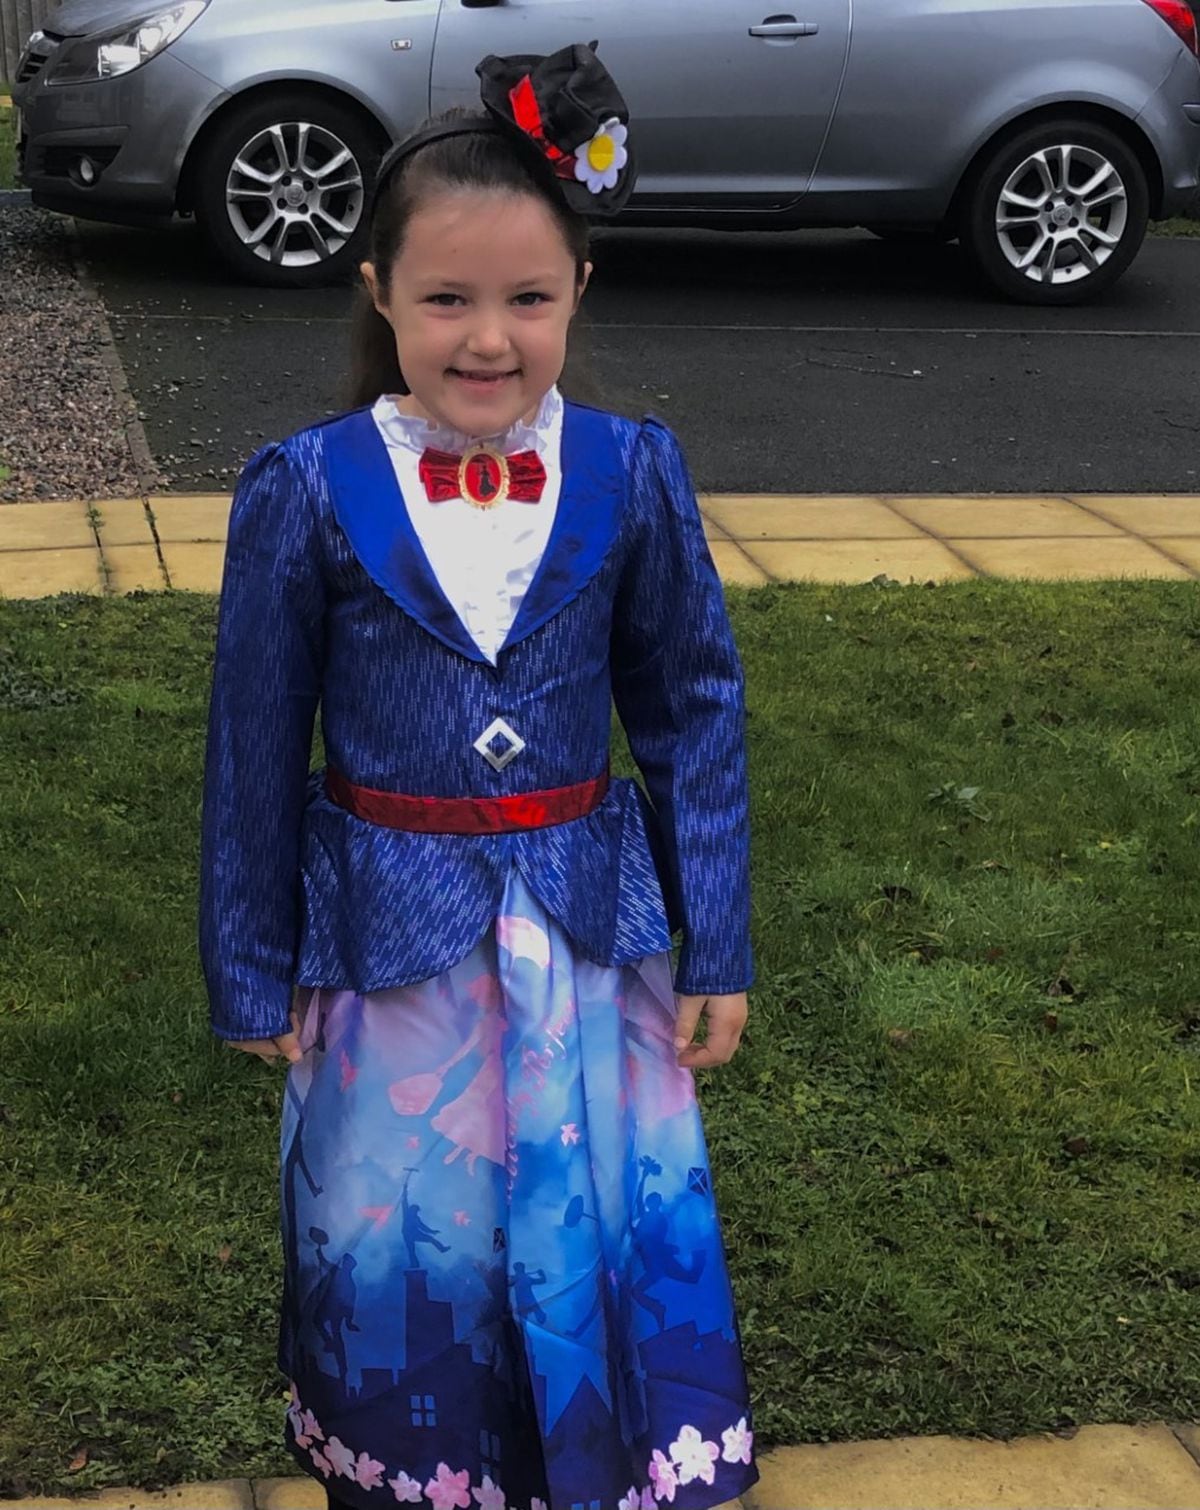 Gracie-May dressed up as Mary Poppins